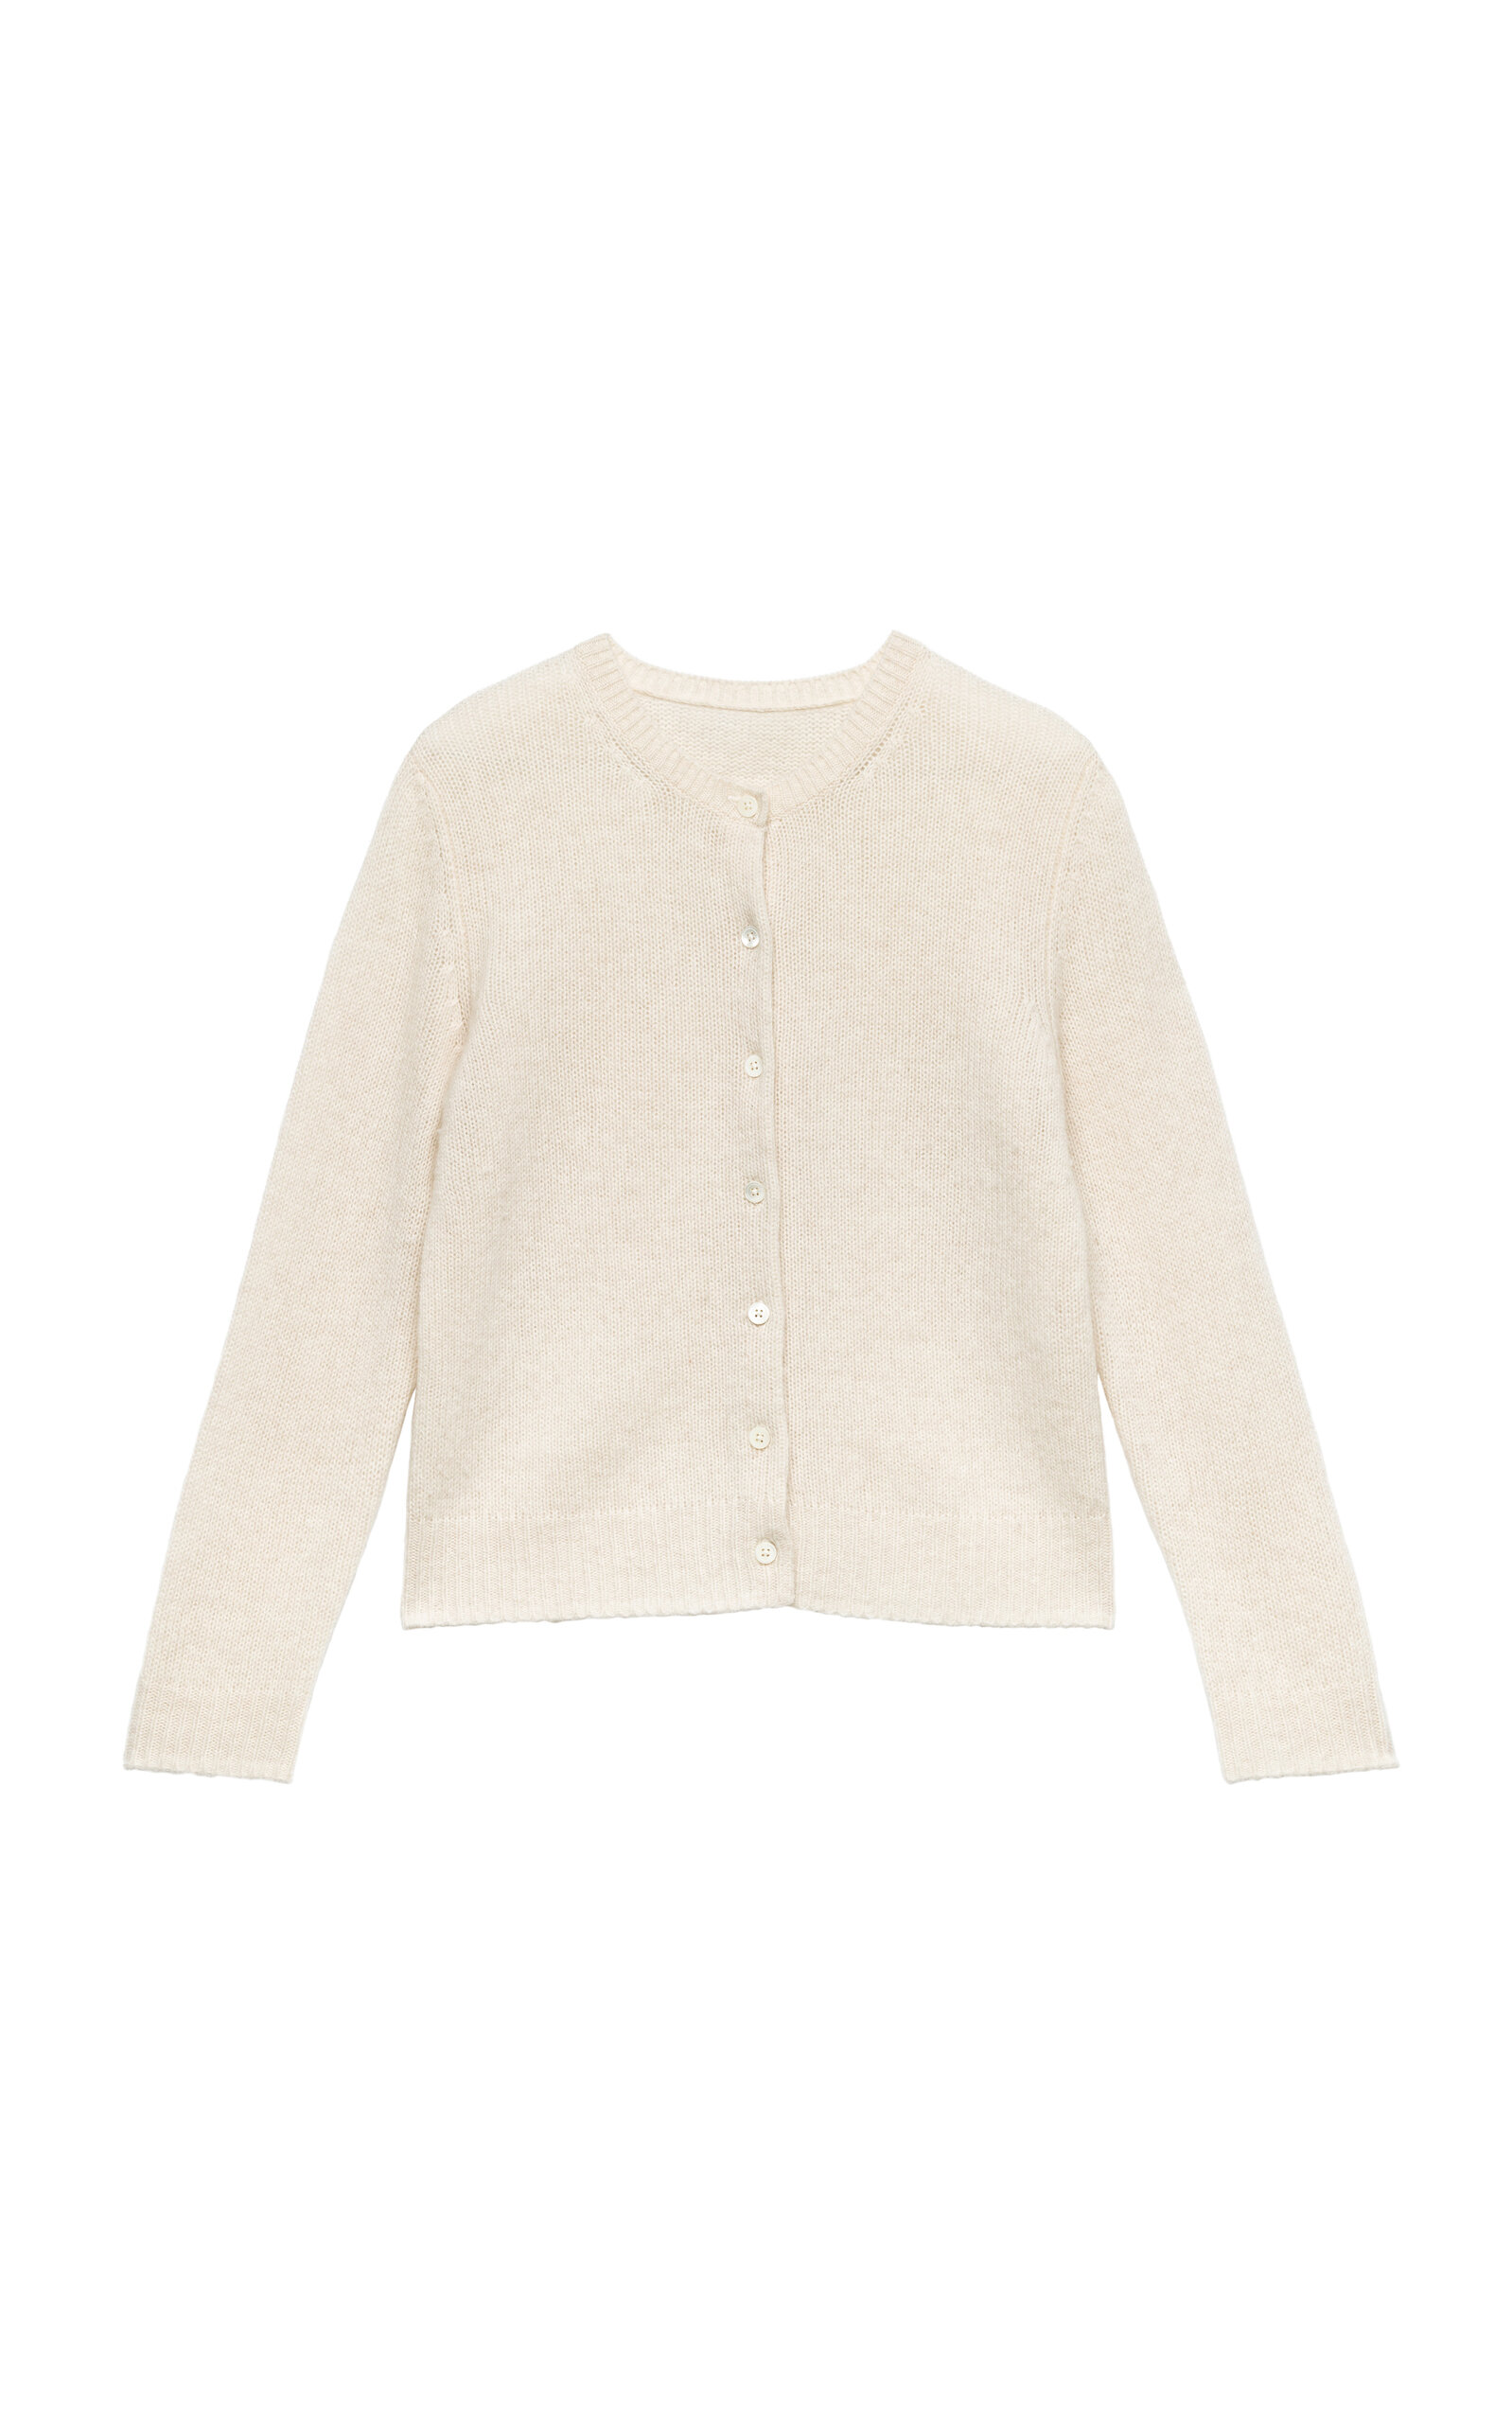 Doen Danae Cropped Cashmere Cardigan In White